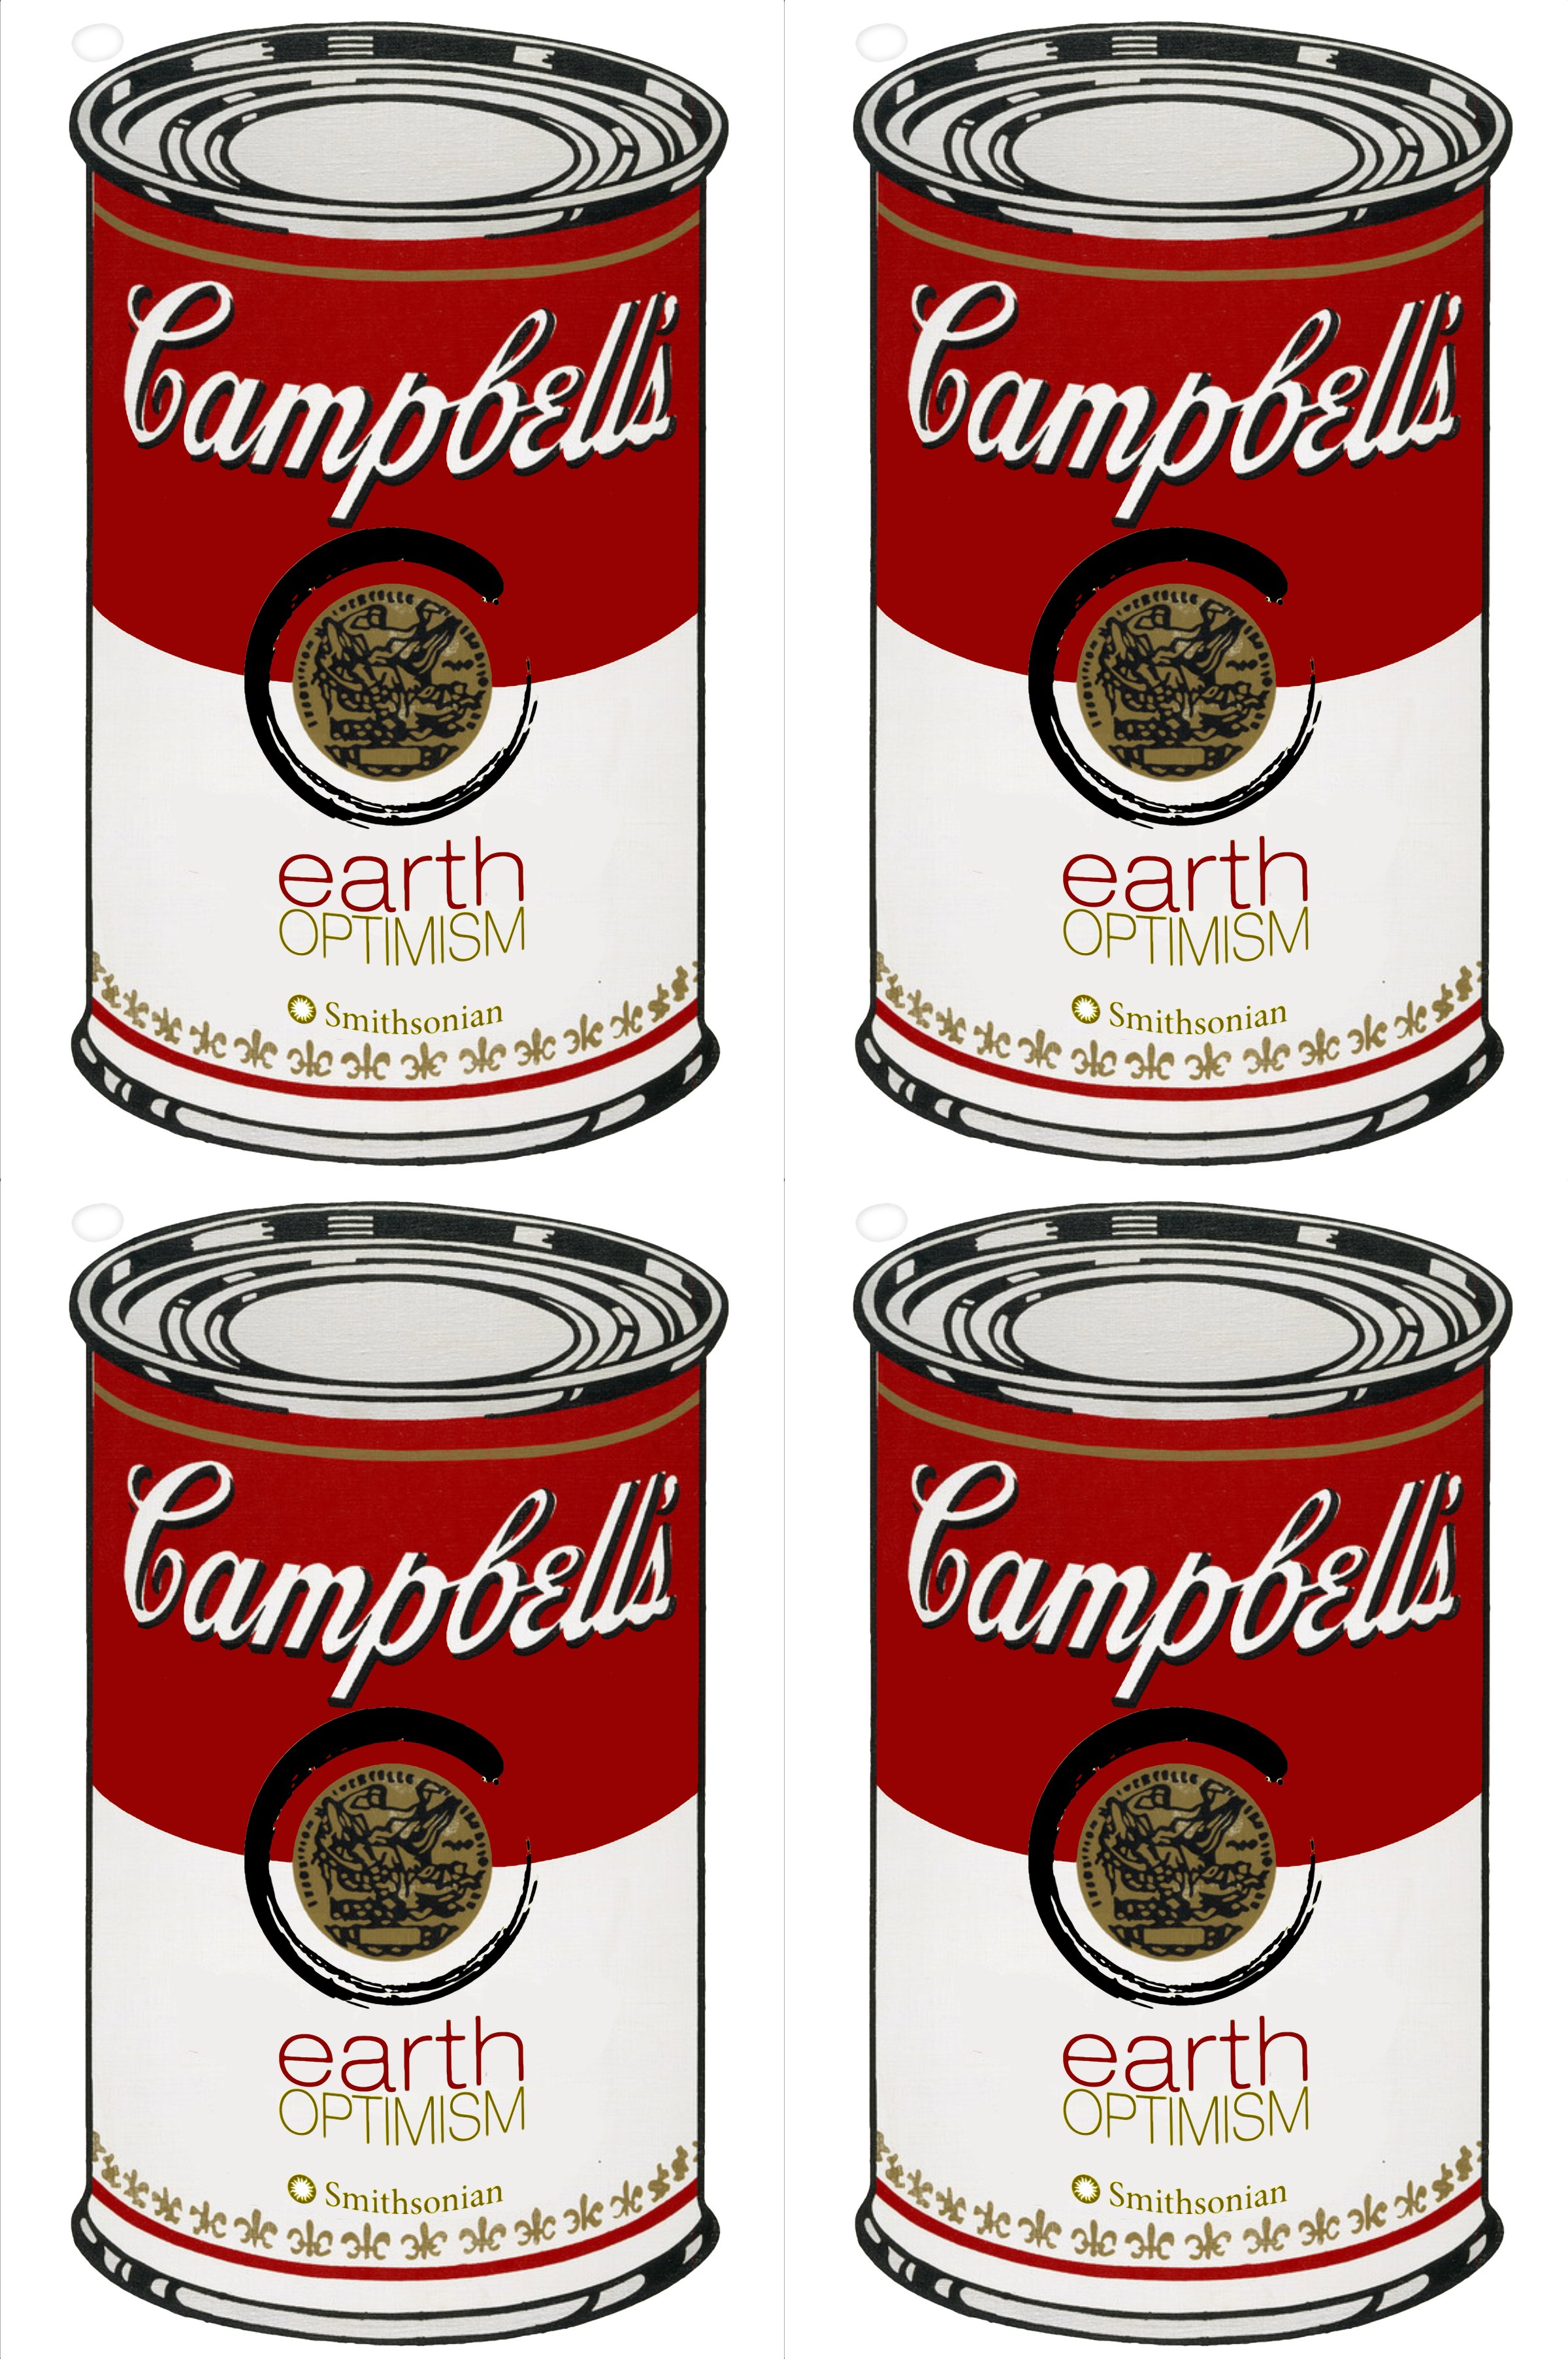 EO 4 Soup Cans.jpg